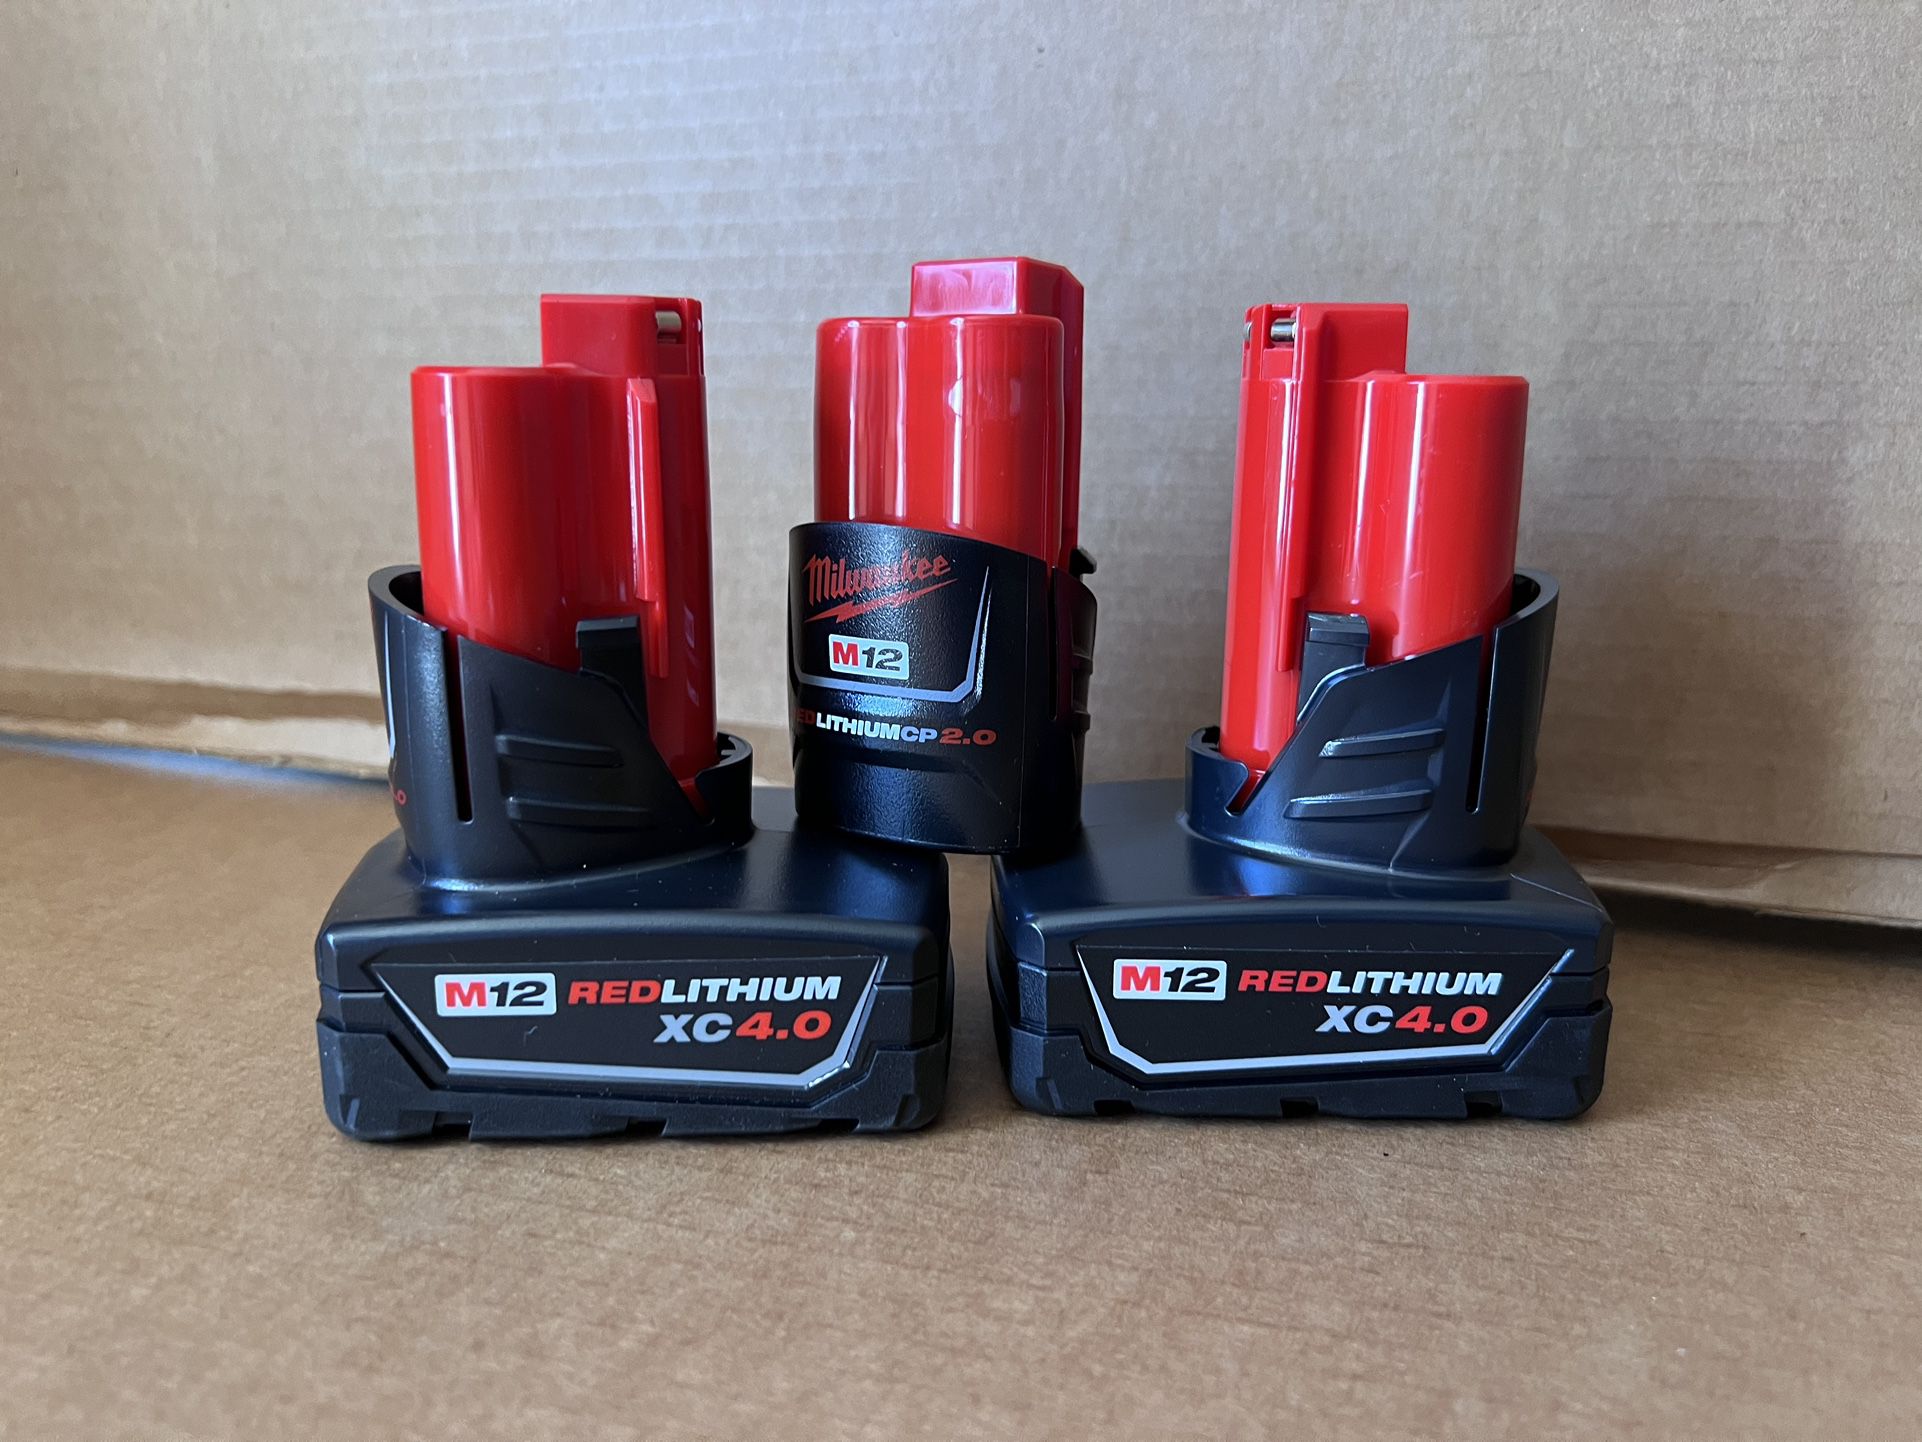 M12  4.0  And  M12  2.0  Milwaukee  Batteries 